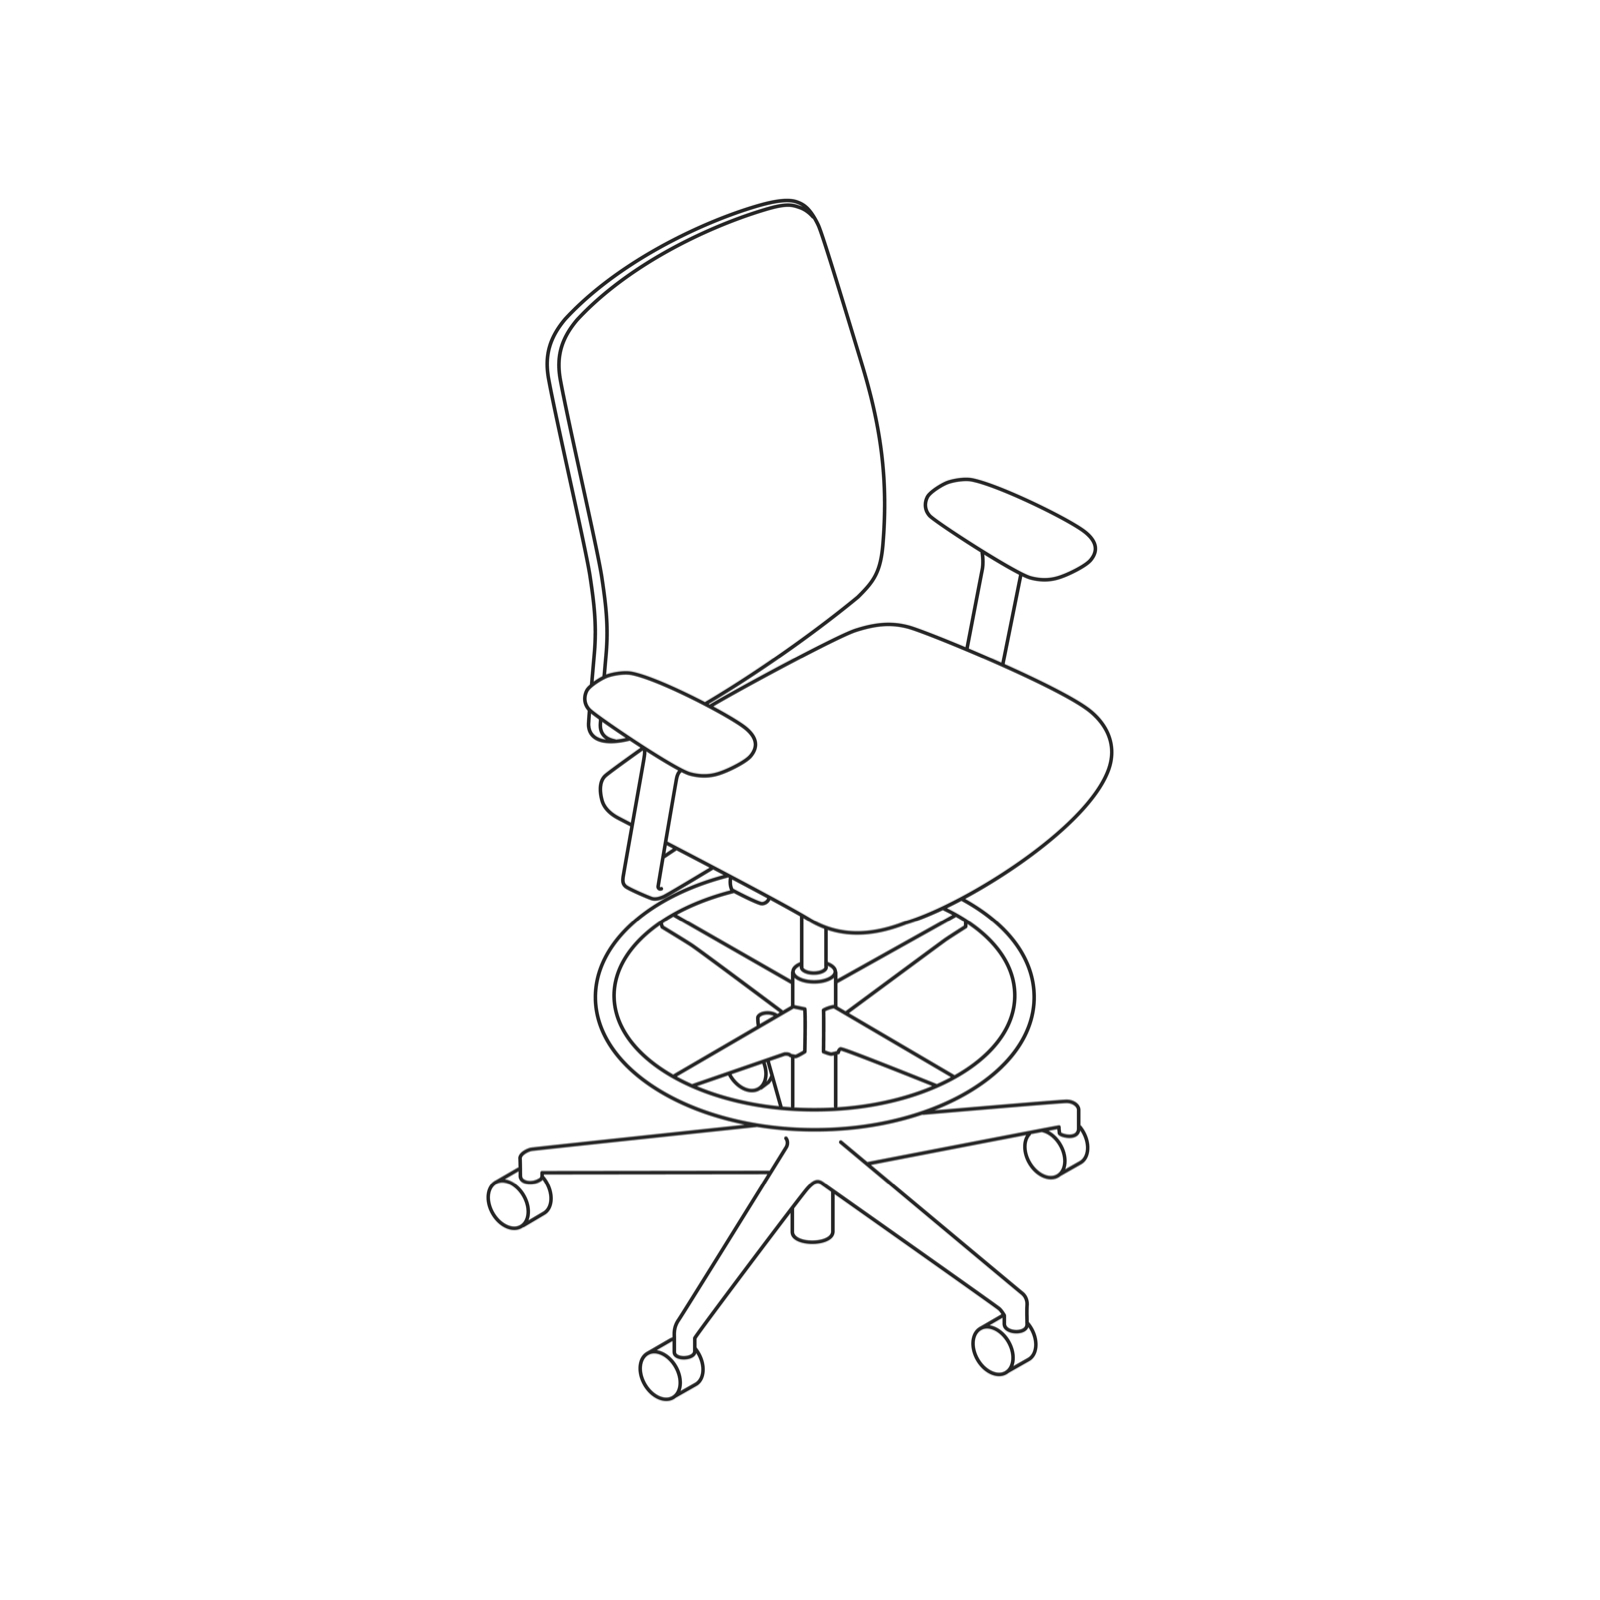 A line drawing of a Verus Stool.